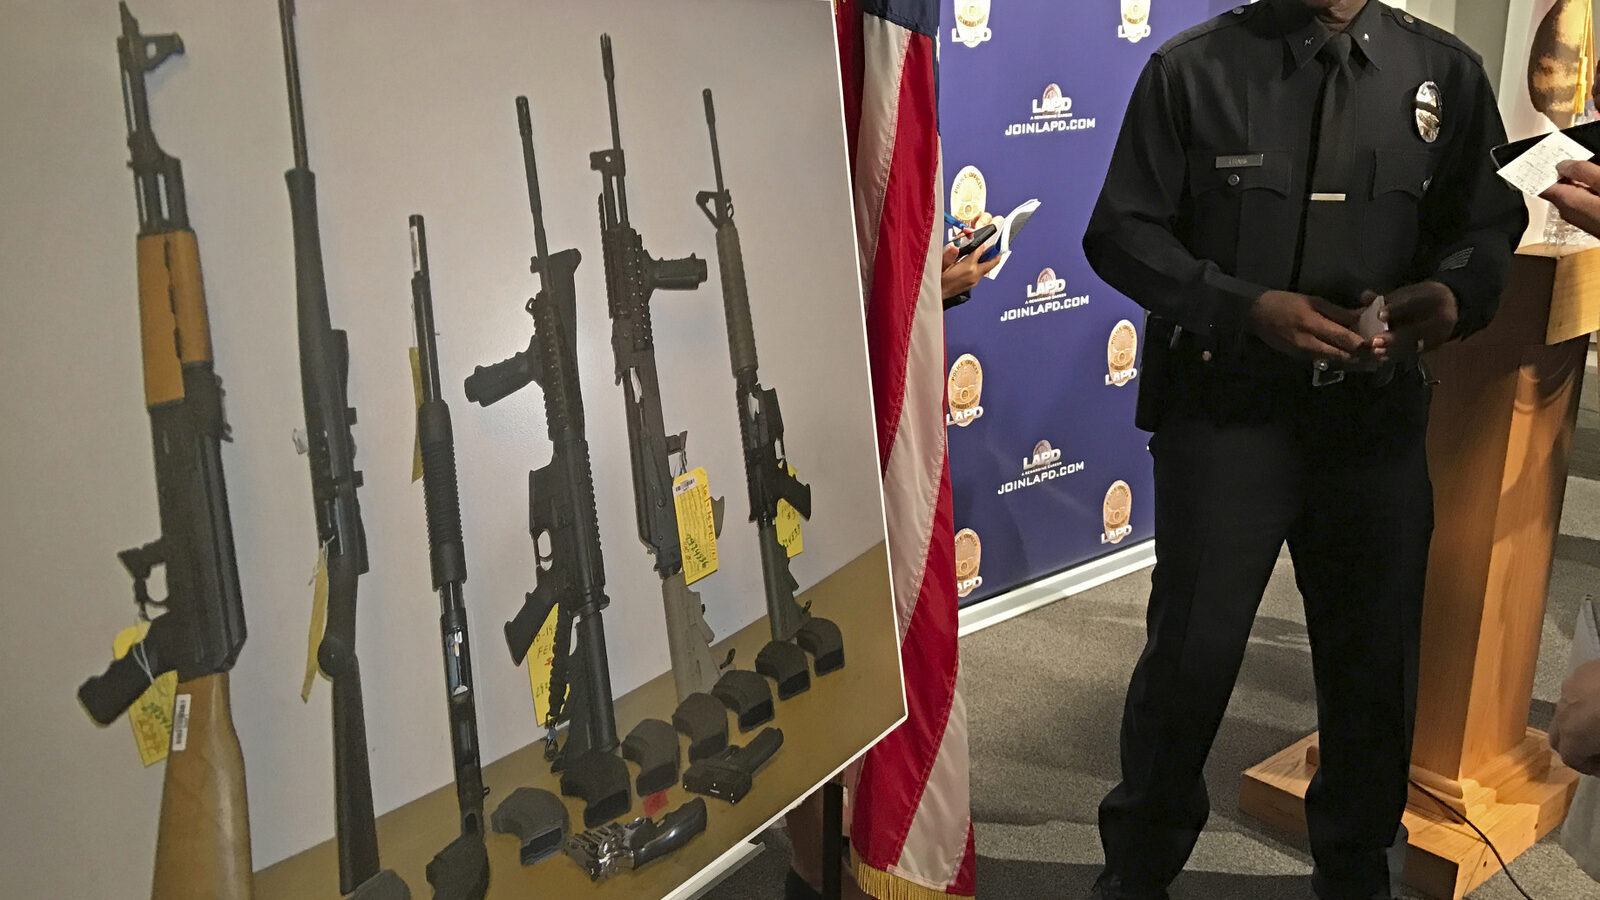 Los Angeles Police Cmdr. Horace Frank, right, shows a photo of multiple weapons found in the home of a man charged with making terrorist threats to the Islamic Center of Southern California, during a police news conference Tuesday, Oct. 25, 2016 in Los Angeles. Mark Lucian Feigin was arrested last week on the charge, which has been designated as a hate crime, according to authorities. Feigin, 40, has been released on bail. Police say Feigin first called the Islamic center Sept. 19 and left a hate-filled voicemail. The next day, they say, he called and threatened to kill people at the center. (AP Photo/Damian Dovarganes)Los Angeles Police Cmdr. Horace Frank, right, shows a photo of multiple weapons found in the home of a man charged with making terrorist threats to the Islamic Center of Southern California, during a police news conference Tuesday, Oct. 25, 2016 in Los Angeles. Mark Lucian Feigin was arrested last week on the charge, which has been designated as a hate crime, according to authorities. Feigin, 40, has been released on bail. Police say Feigin first called the Islamic center Sept. 19 and left a hate-filled voicemail. The next day, they say, he called and threatened to kill people at the center. (AP Photo/Damian Dovarganes)